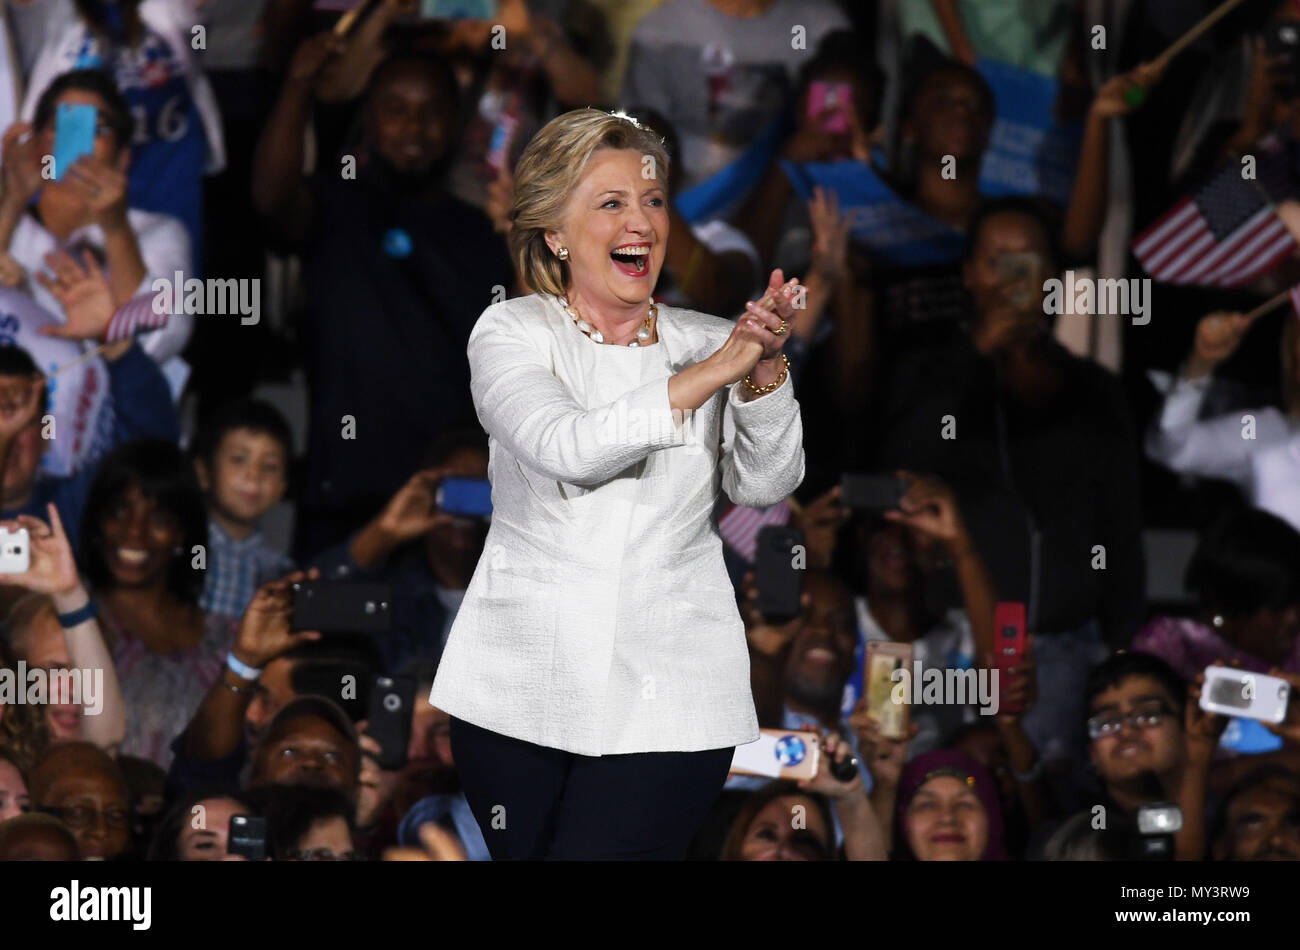 FT LAUDERDALE, FL - NOVEMBER 01: Supporters look on as Democratic presidential nominee Hillary Clinton speaks during a campaign rally at Rev Samuel Deleove Memorial Park on November 1, 2016 in Ft Lauderdale, Florida. The presidential general general election is November 8  People:  Hillary Clinton Credit: Hoo-Me.com / MediaPunch Stock Photo